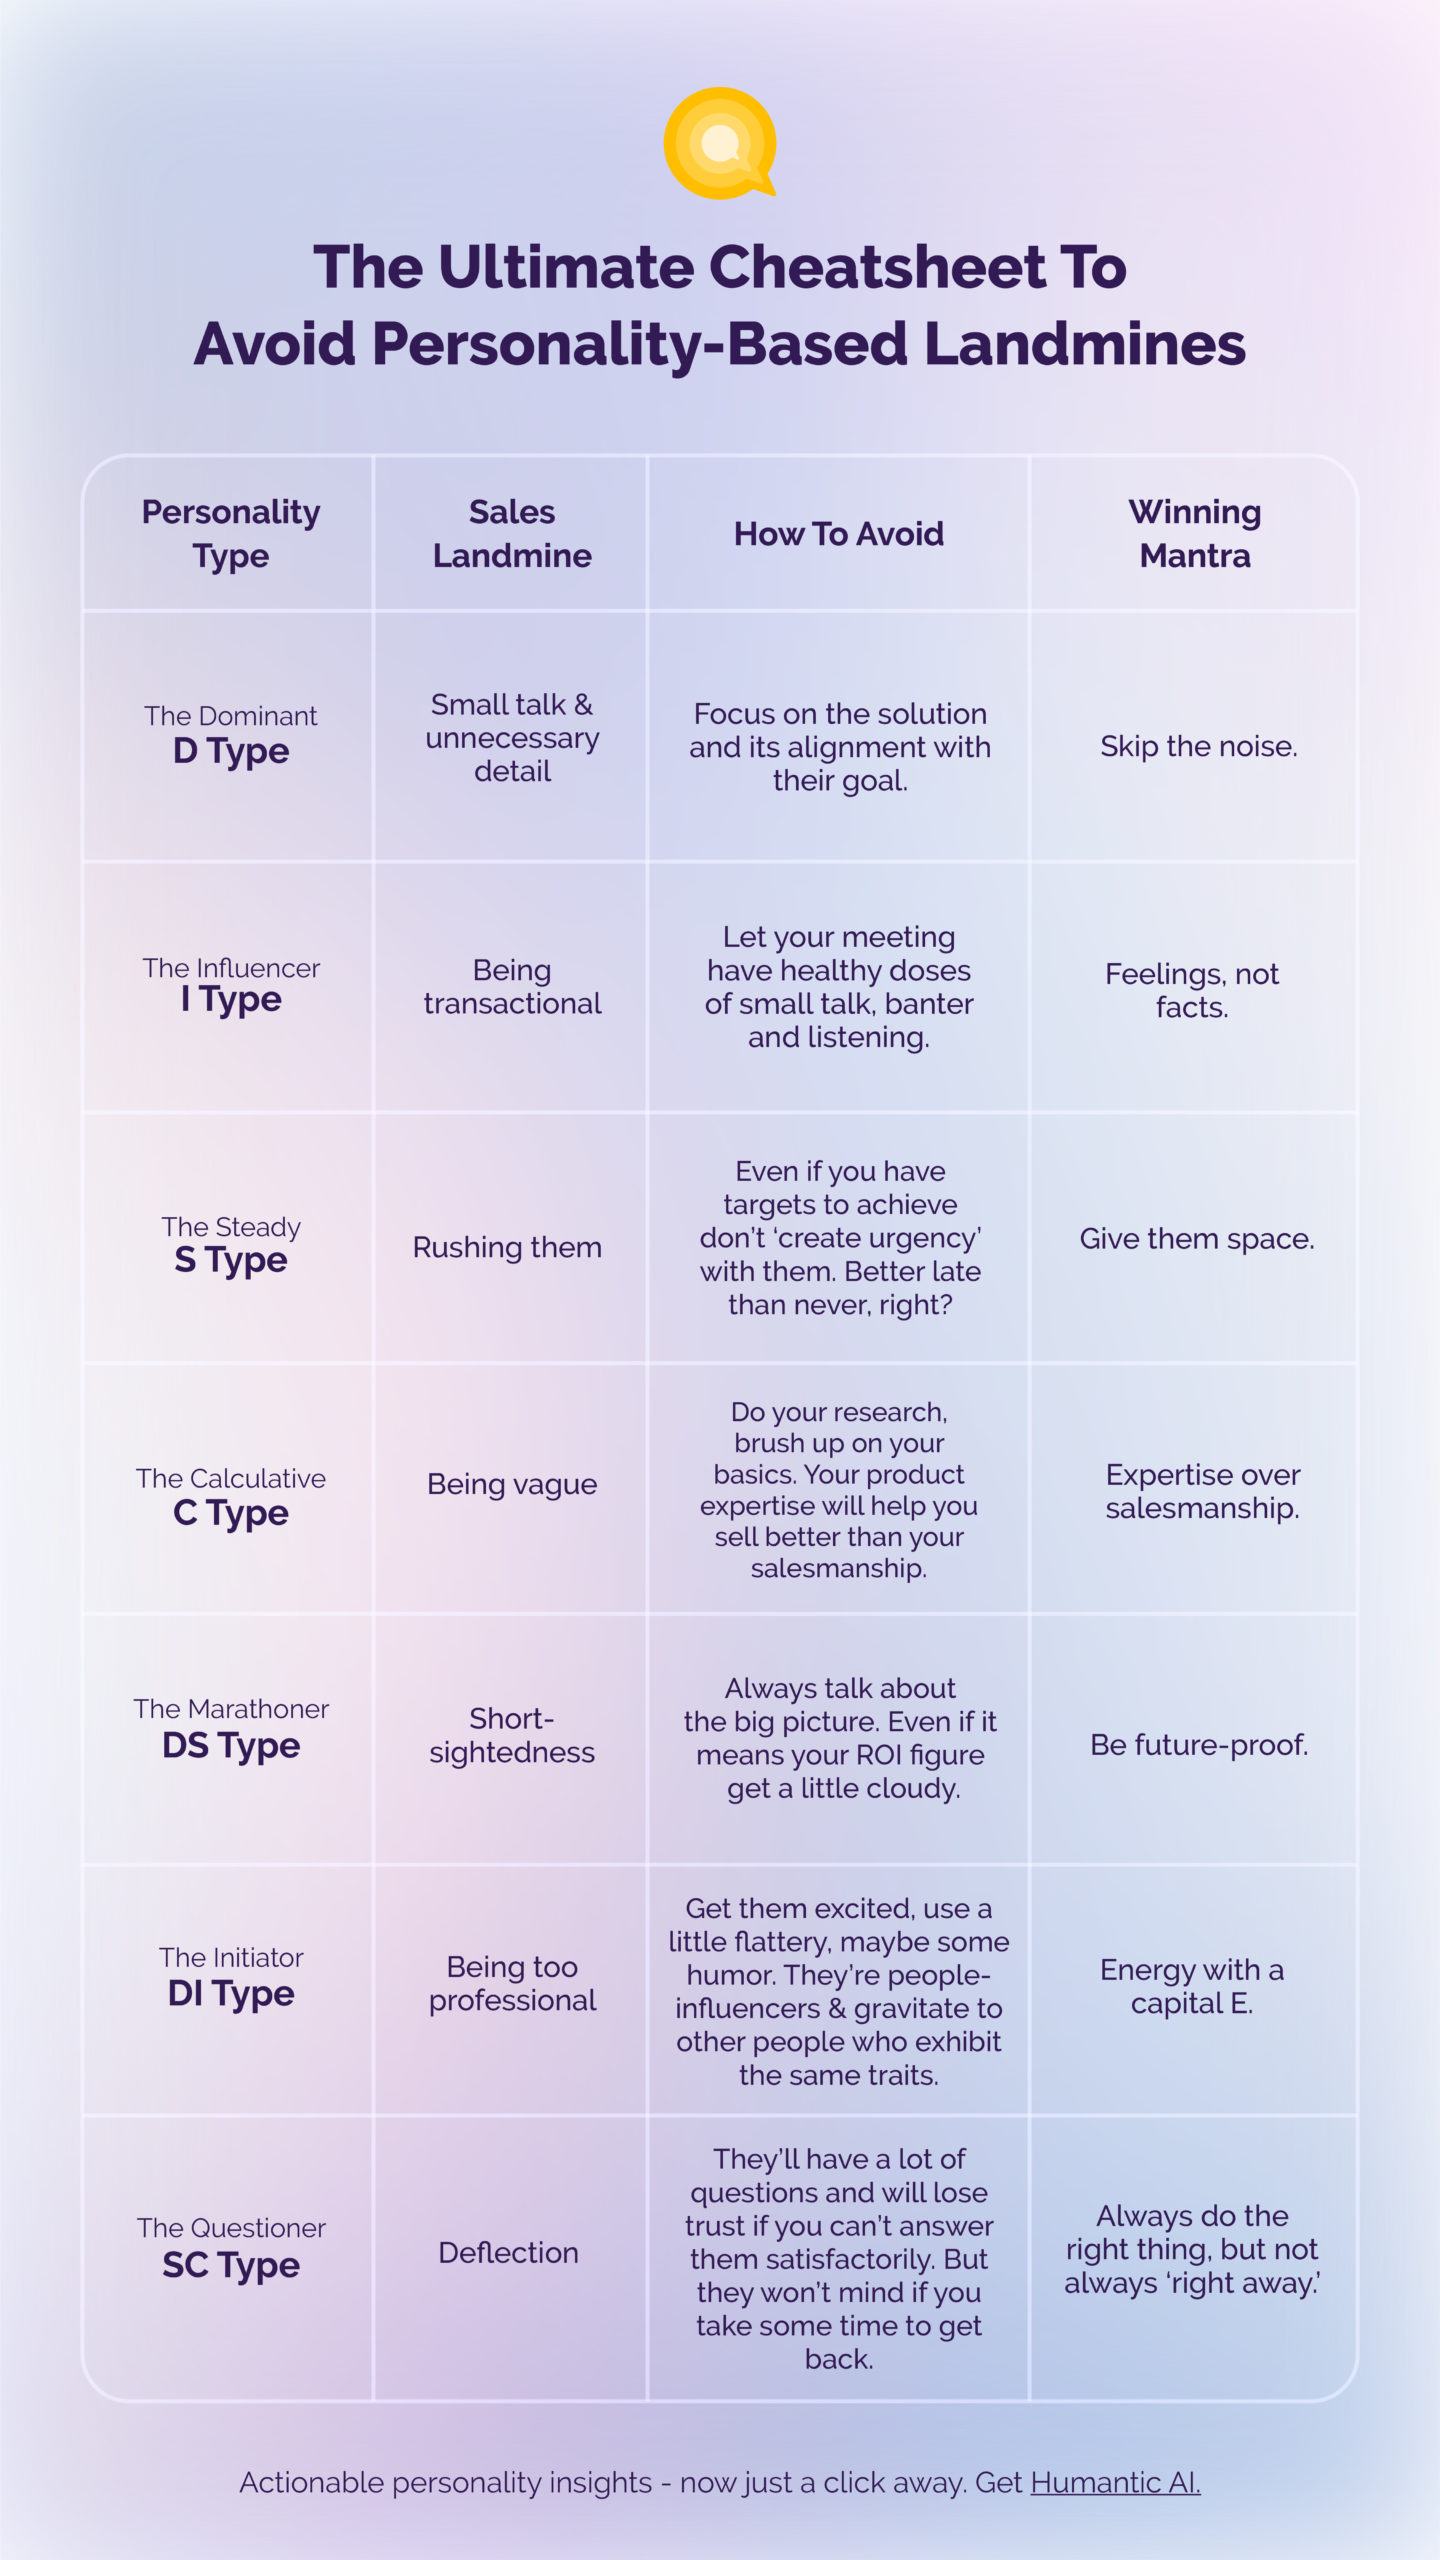 A cheatsheet that explains how to avoid sales landmines based on a buyer's personality type